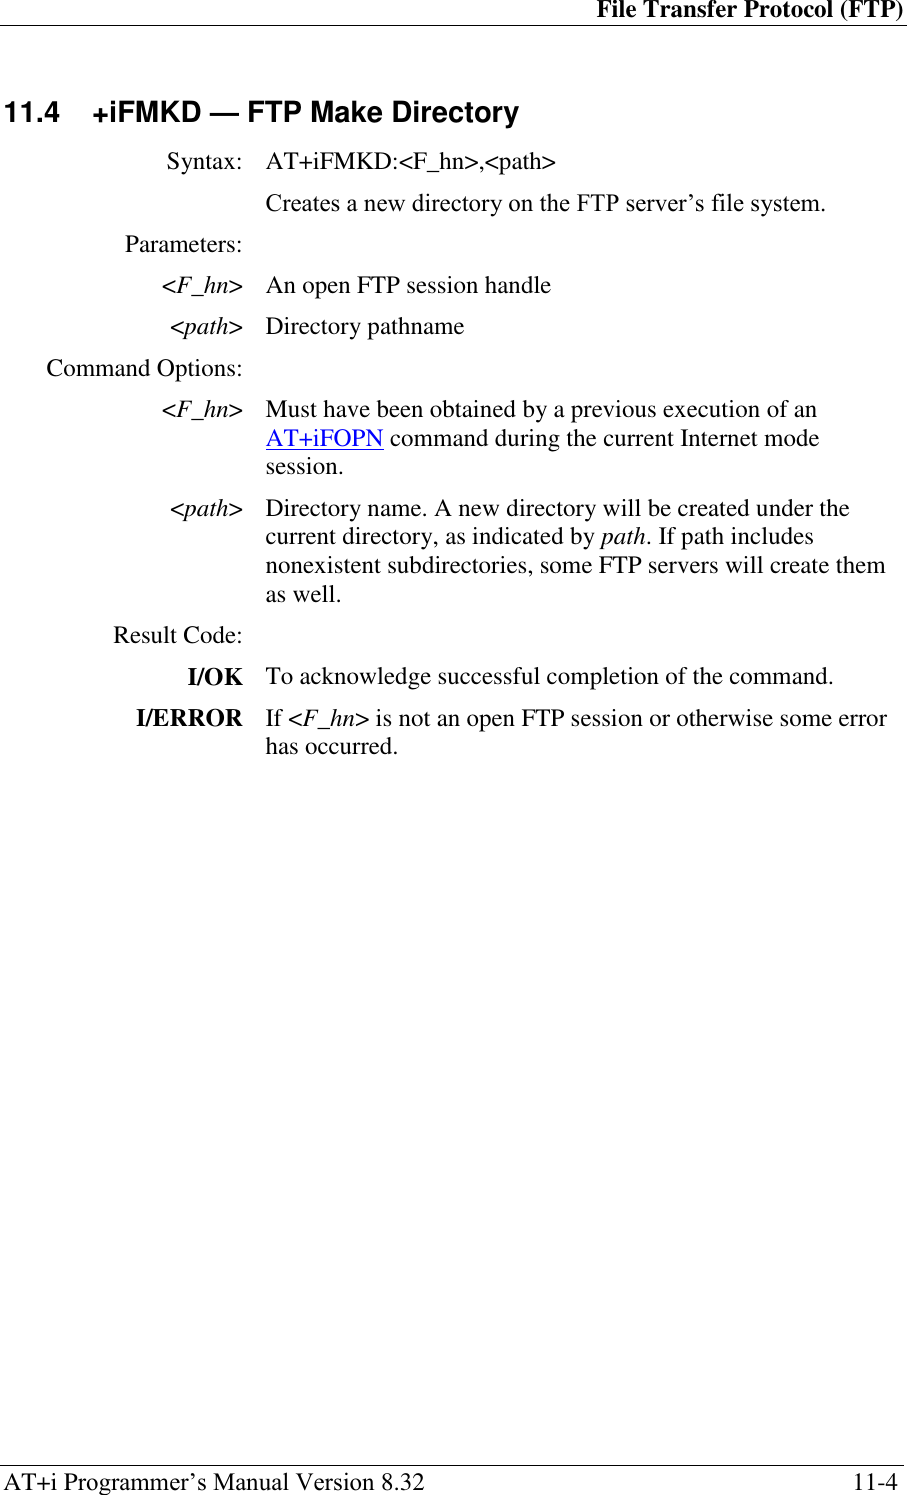 File Transfer Protocol (FTP) AT+i Programmer‘s Manual Version 8.32  11-4 11.4  +iFMKD — FTP Make Directory  Syntax: AT+iFMKD:&lt;F_hn&gt;,&lt;path&gt;  Creates a new directory on the FTP server‘s file system. Parameters:  &lt;F_hn&gt; An open FTP session handle &lt;path&gt; Directory pathname Command Options:  &lt;F_hn&gt; Must have been obtained by a previous execution of an AT+iFOPN command during the current Internet mode session. &lt;path&gt; Directory name. A new directory will be created under the current directory, as indicated by path. If path includes nonexistent subdirectories, some FTP servers will create them as well. Result Code:  I/OK To acknowledge successful completion of the command. I/ERROR If &lt;F_hn&gt; is not an open FTP session or otherwise some error has occurred.  